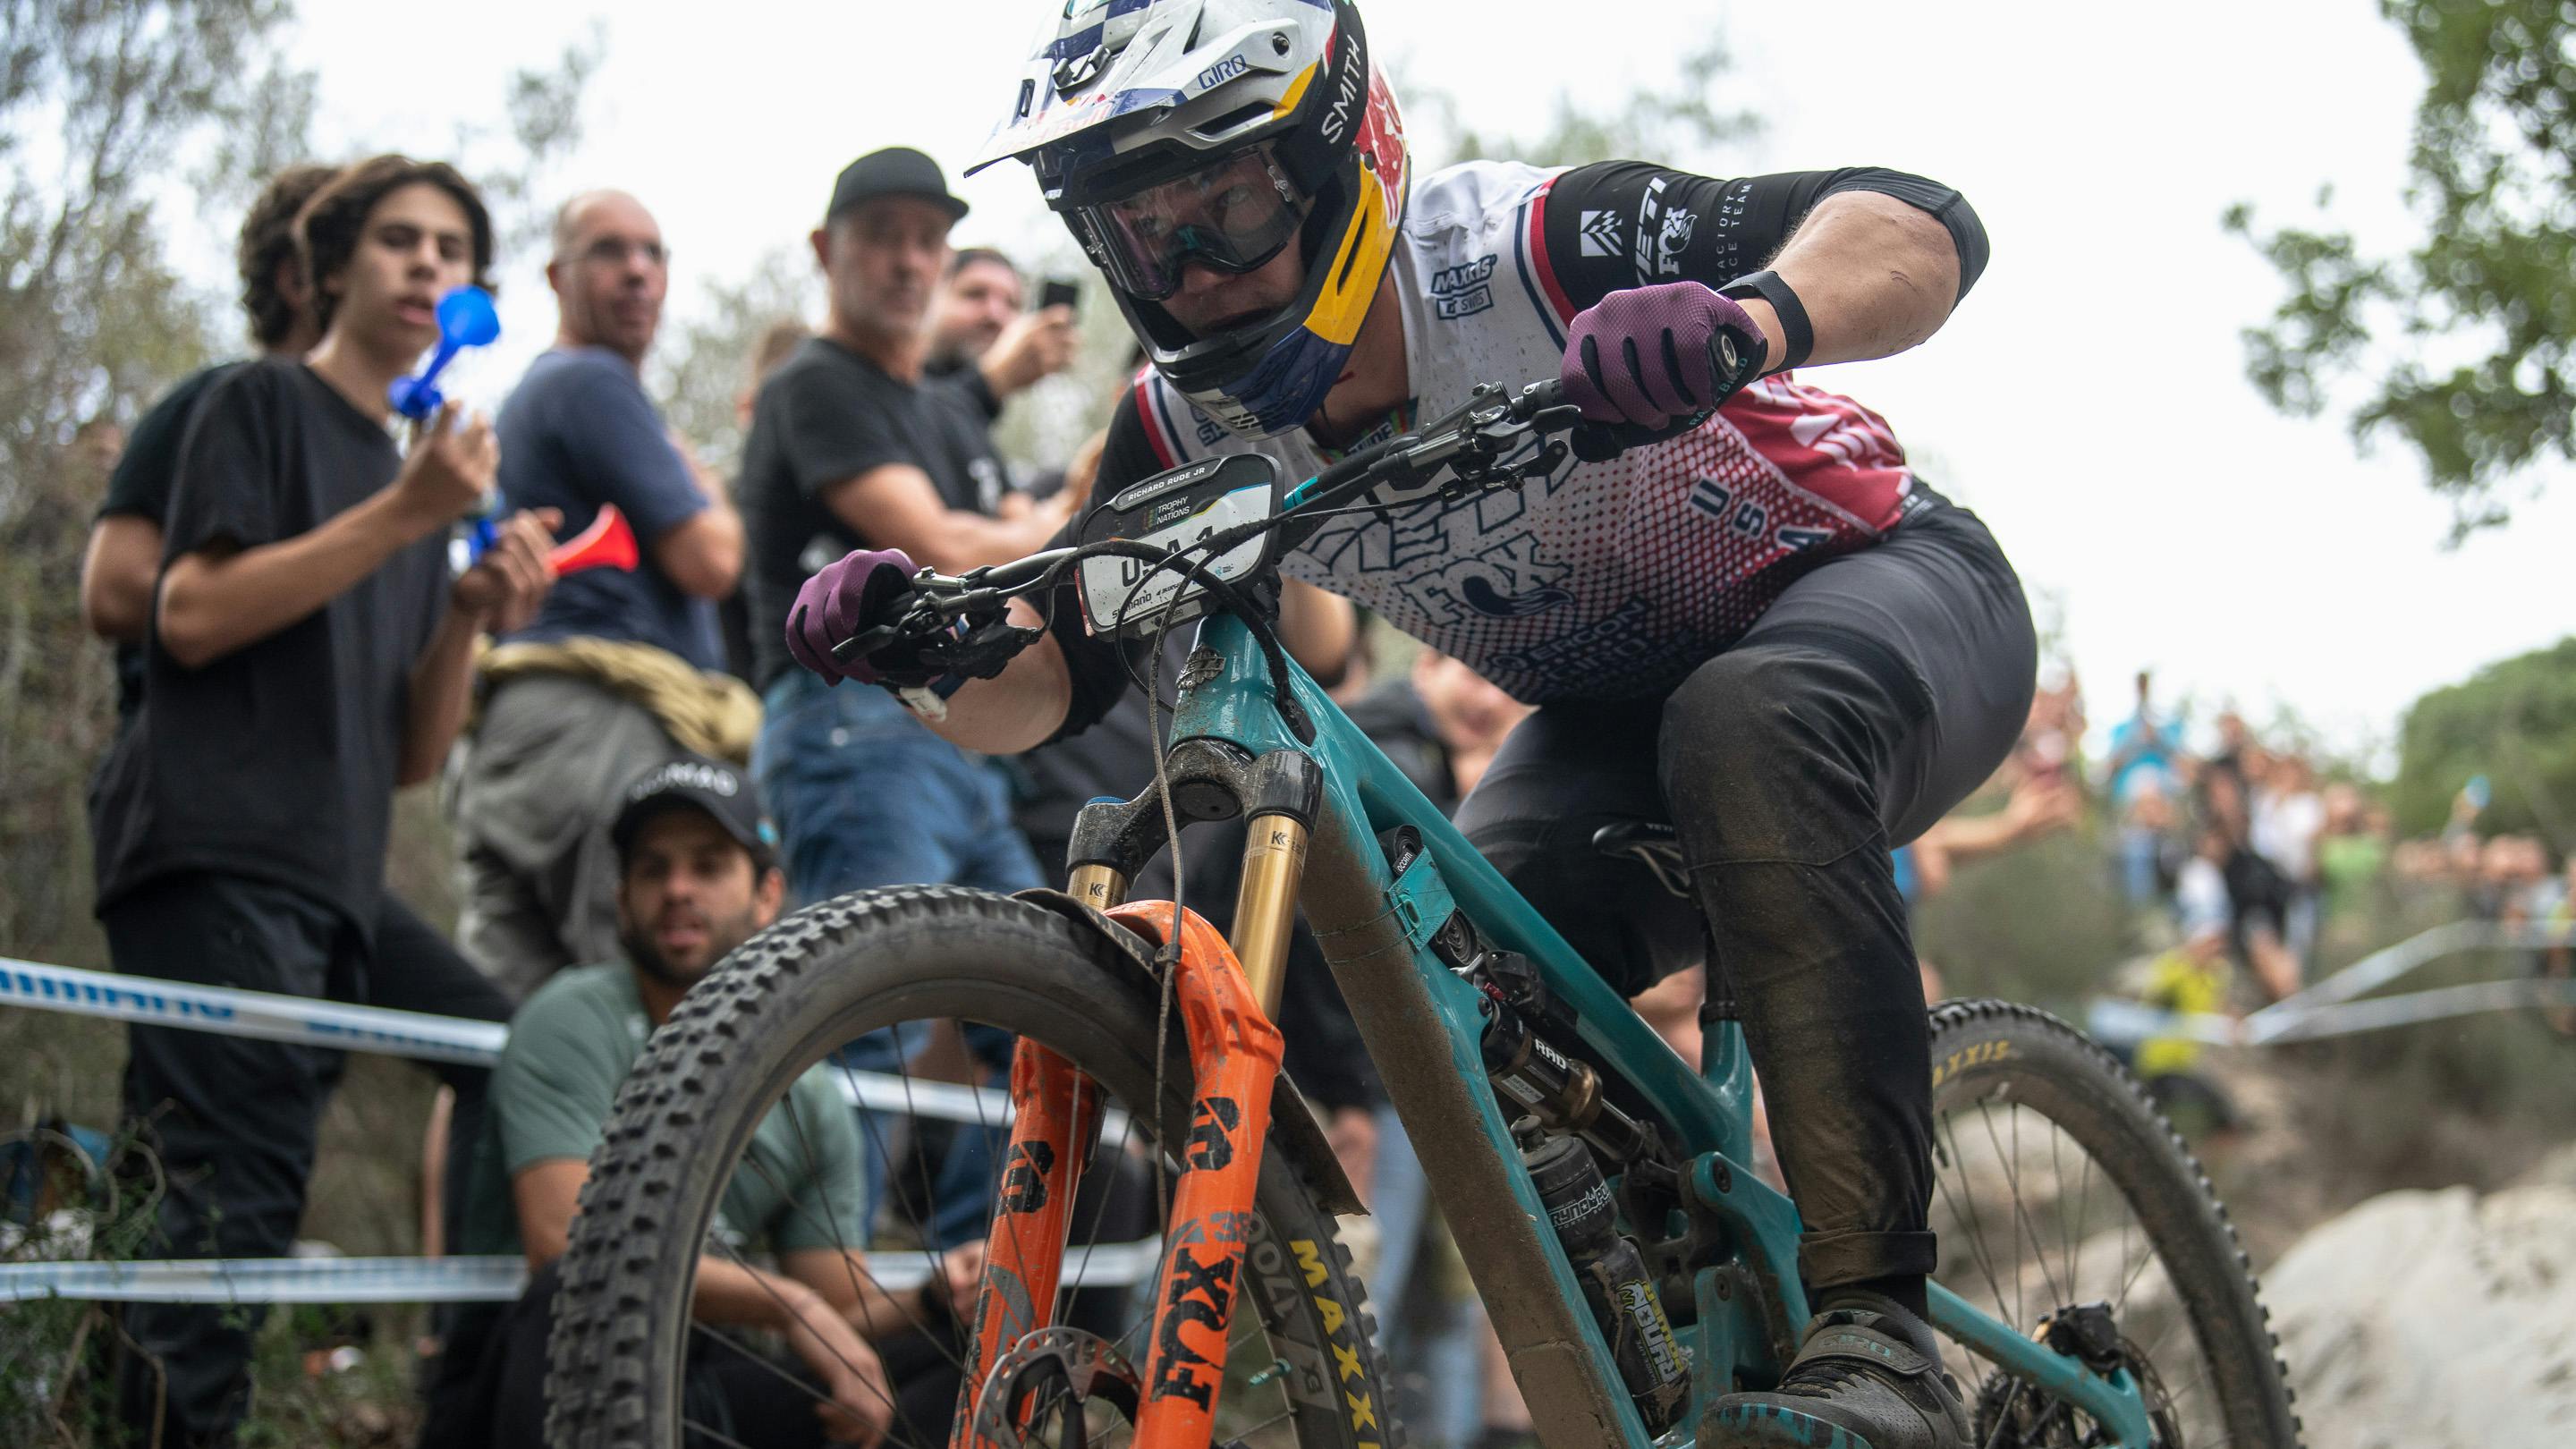 EWS Trophy of Nations - Richie Rude